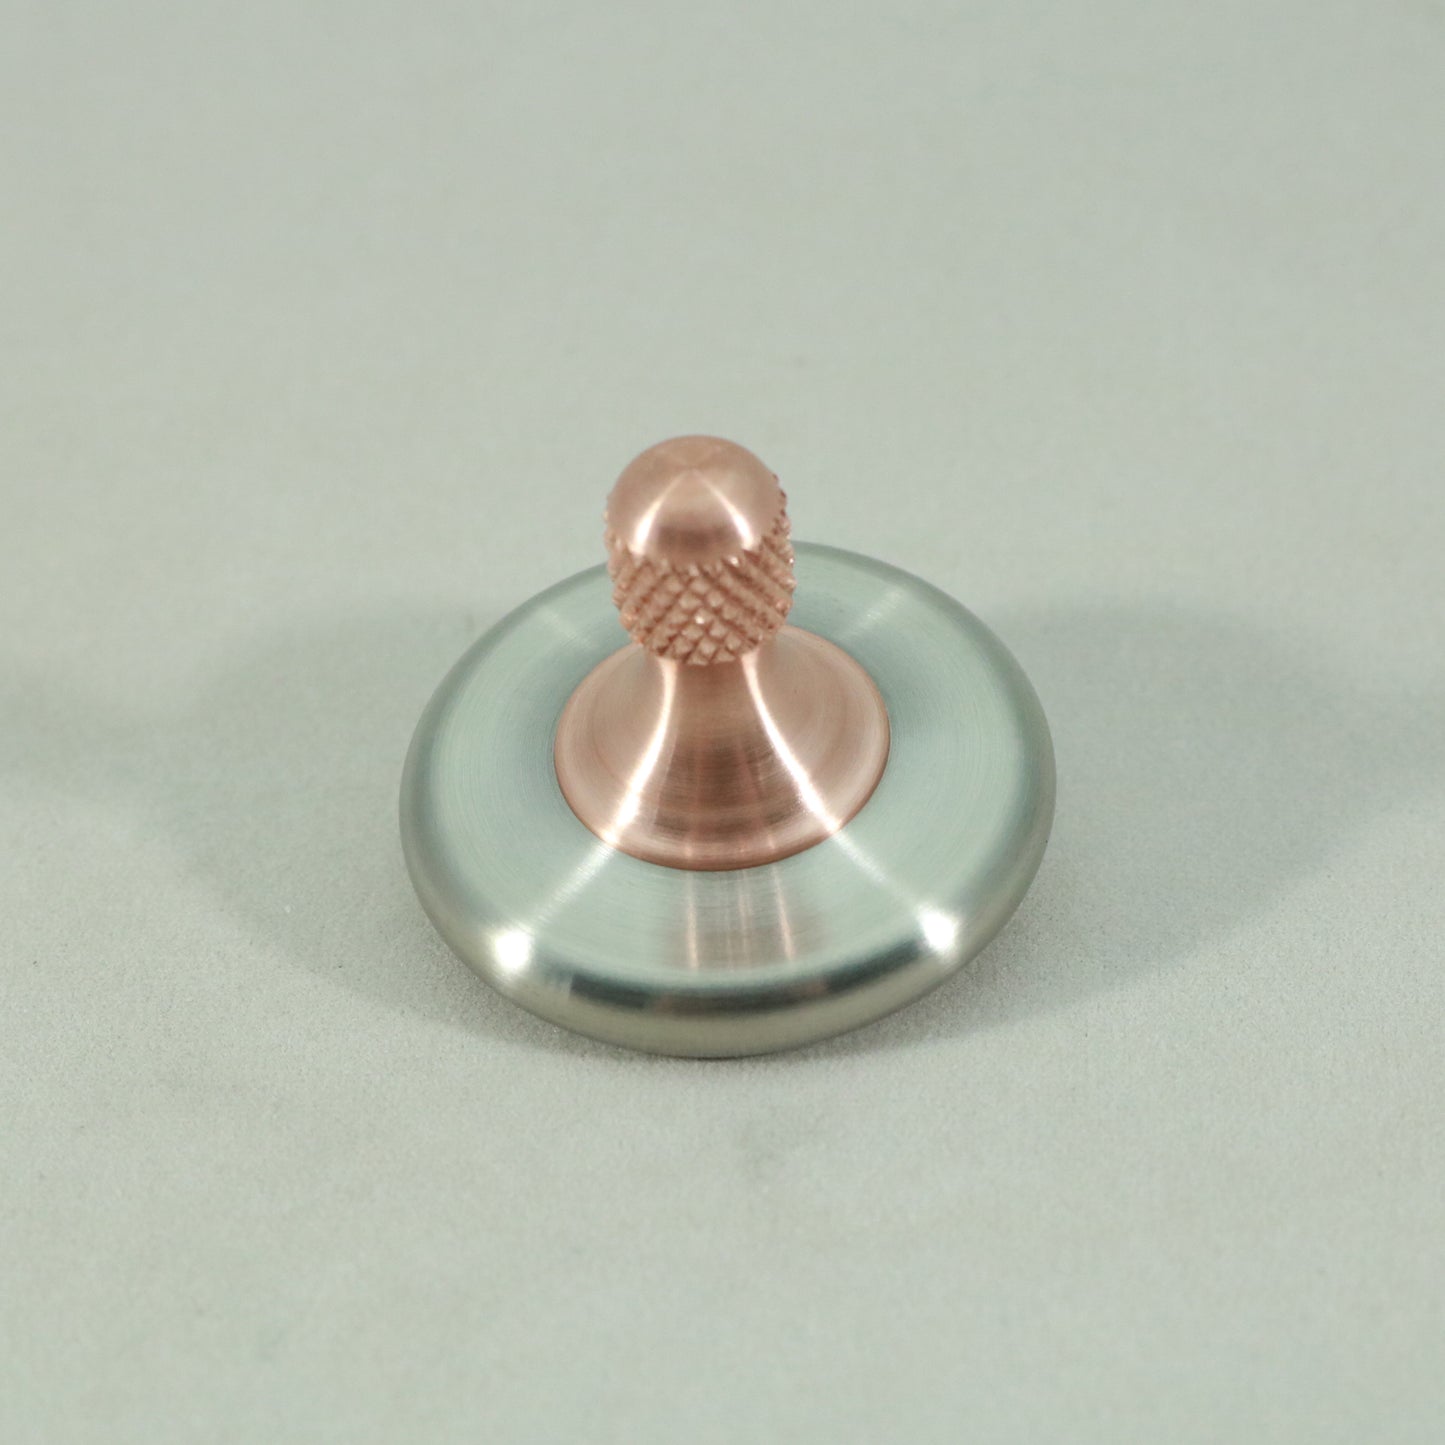 M3 - Brushed Stainless Steel and Copper Spinning Top Knurled